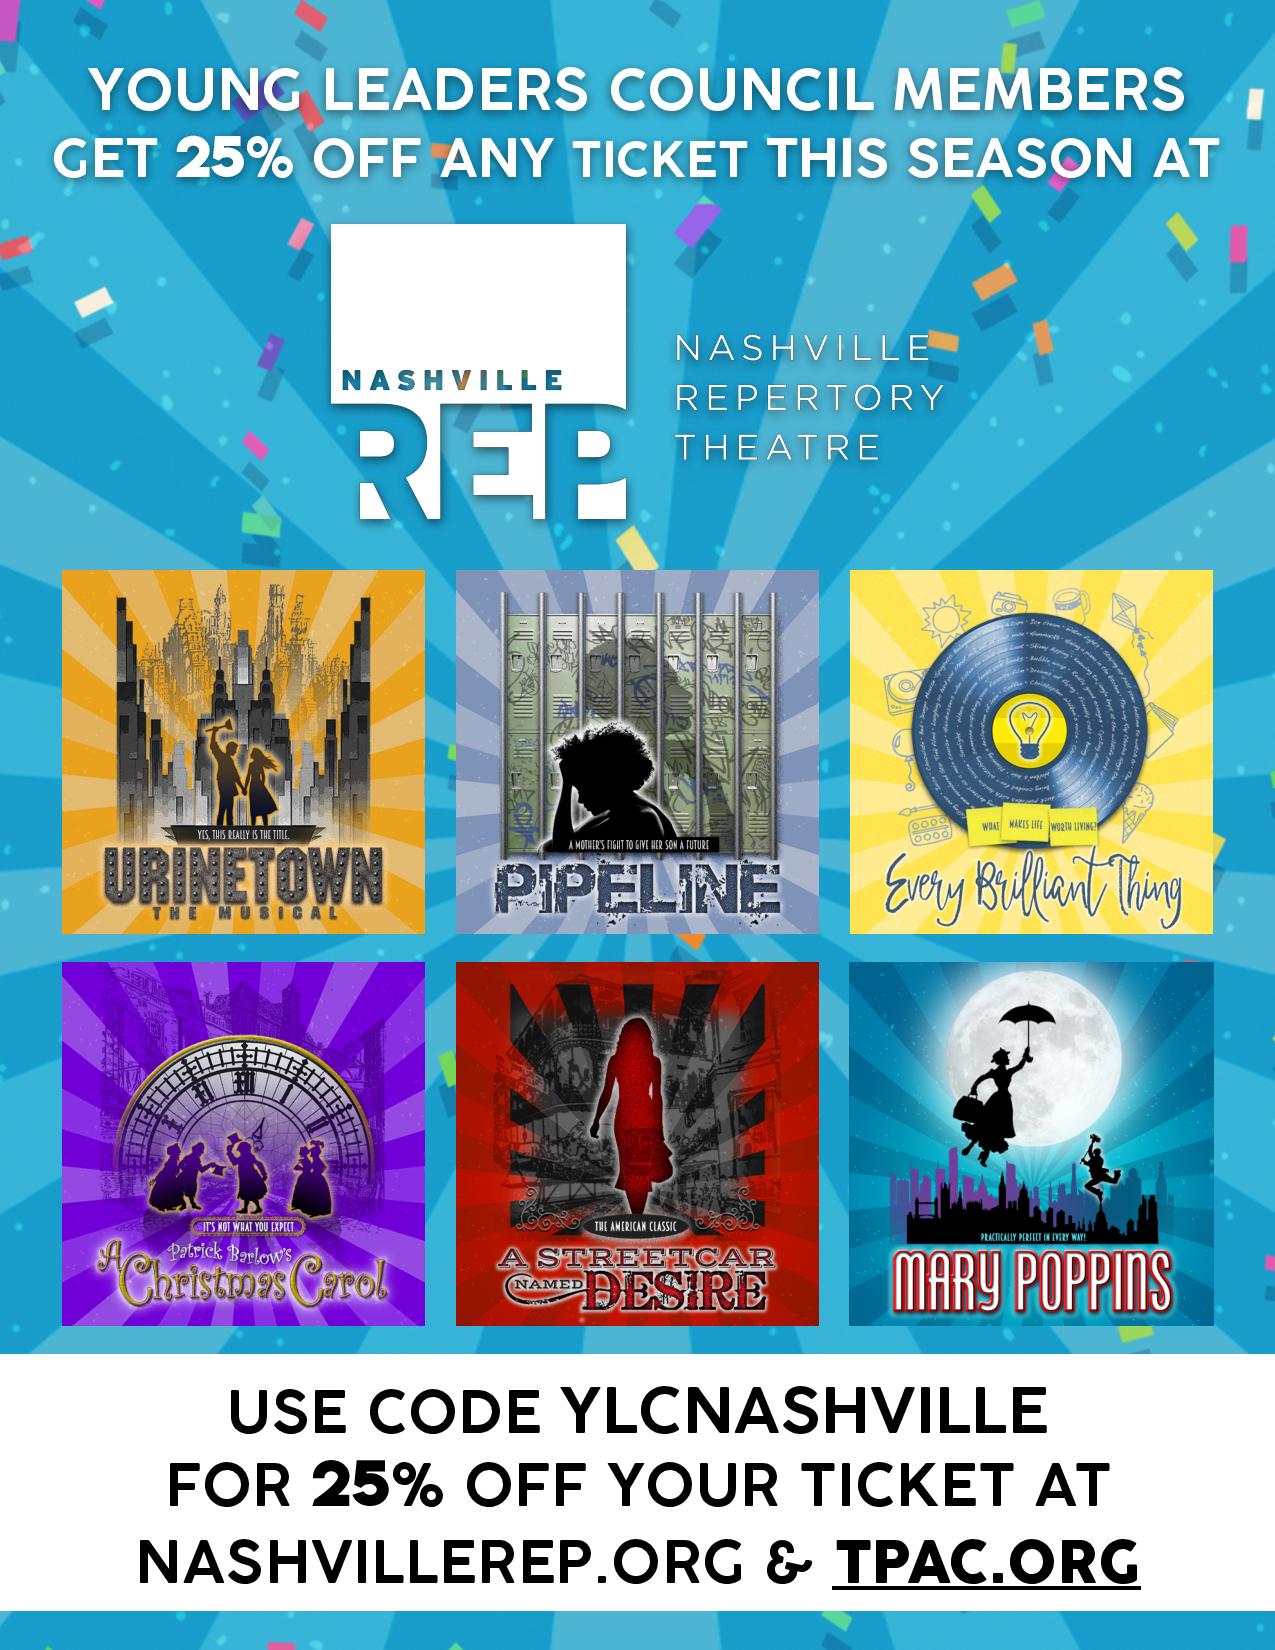 Exclusive 25% Discount for YLC Alumni and Class Participants for 2019/20 Season of Nashville Rep